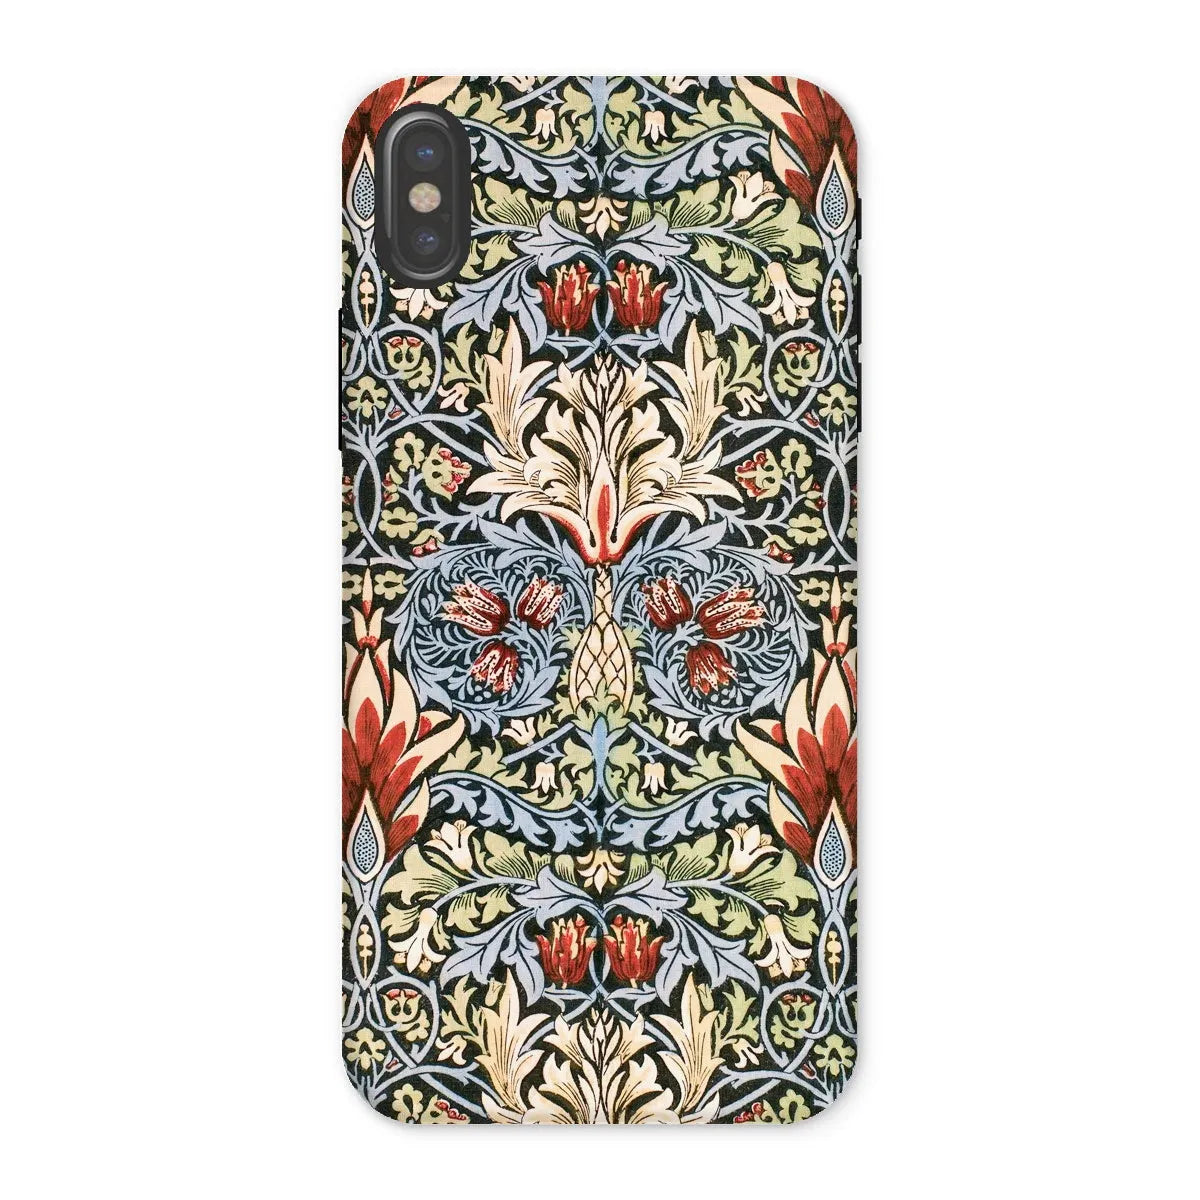 Snakeshead - Arts And Crafts Pattern Phone Case - William Morris - Iphone x / Matte - Mobile Phone Cases - Aesthetic Art